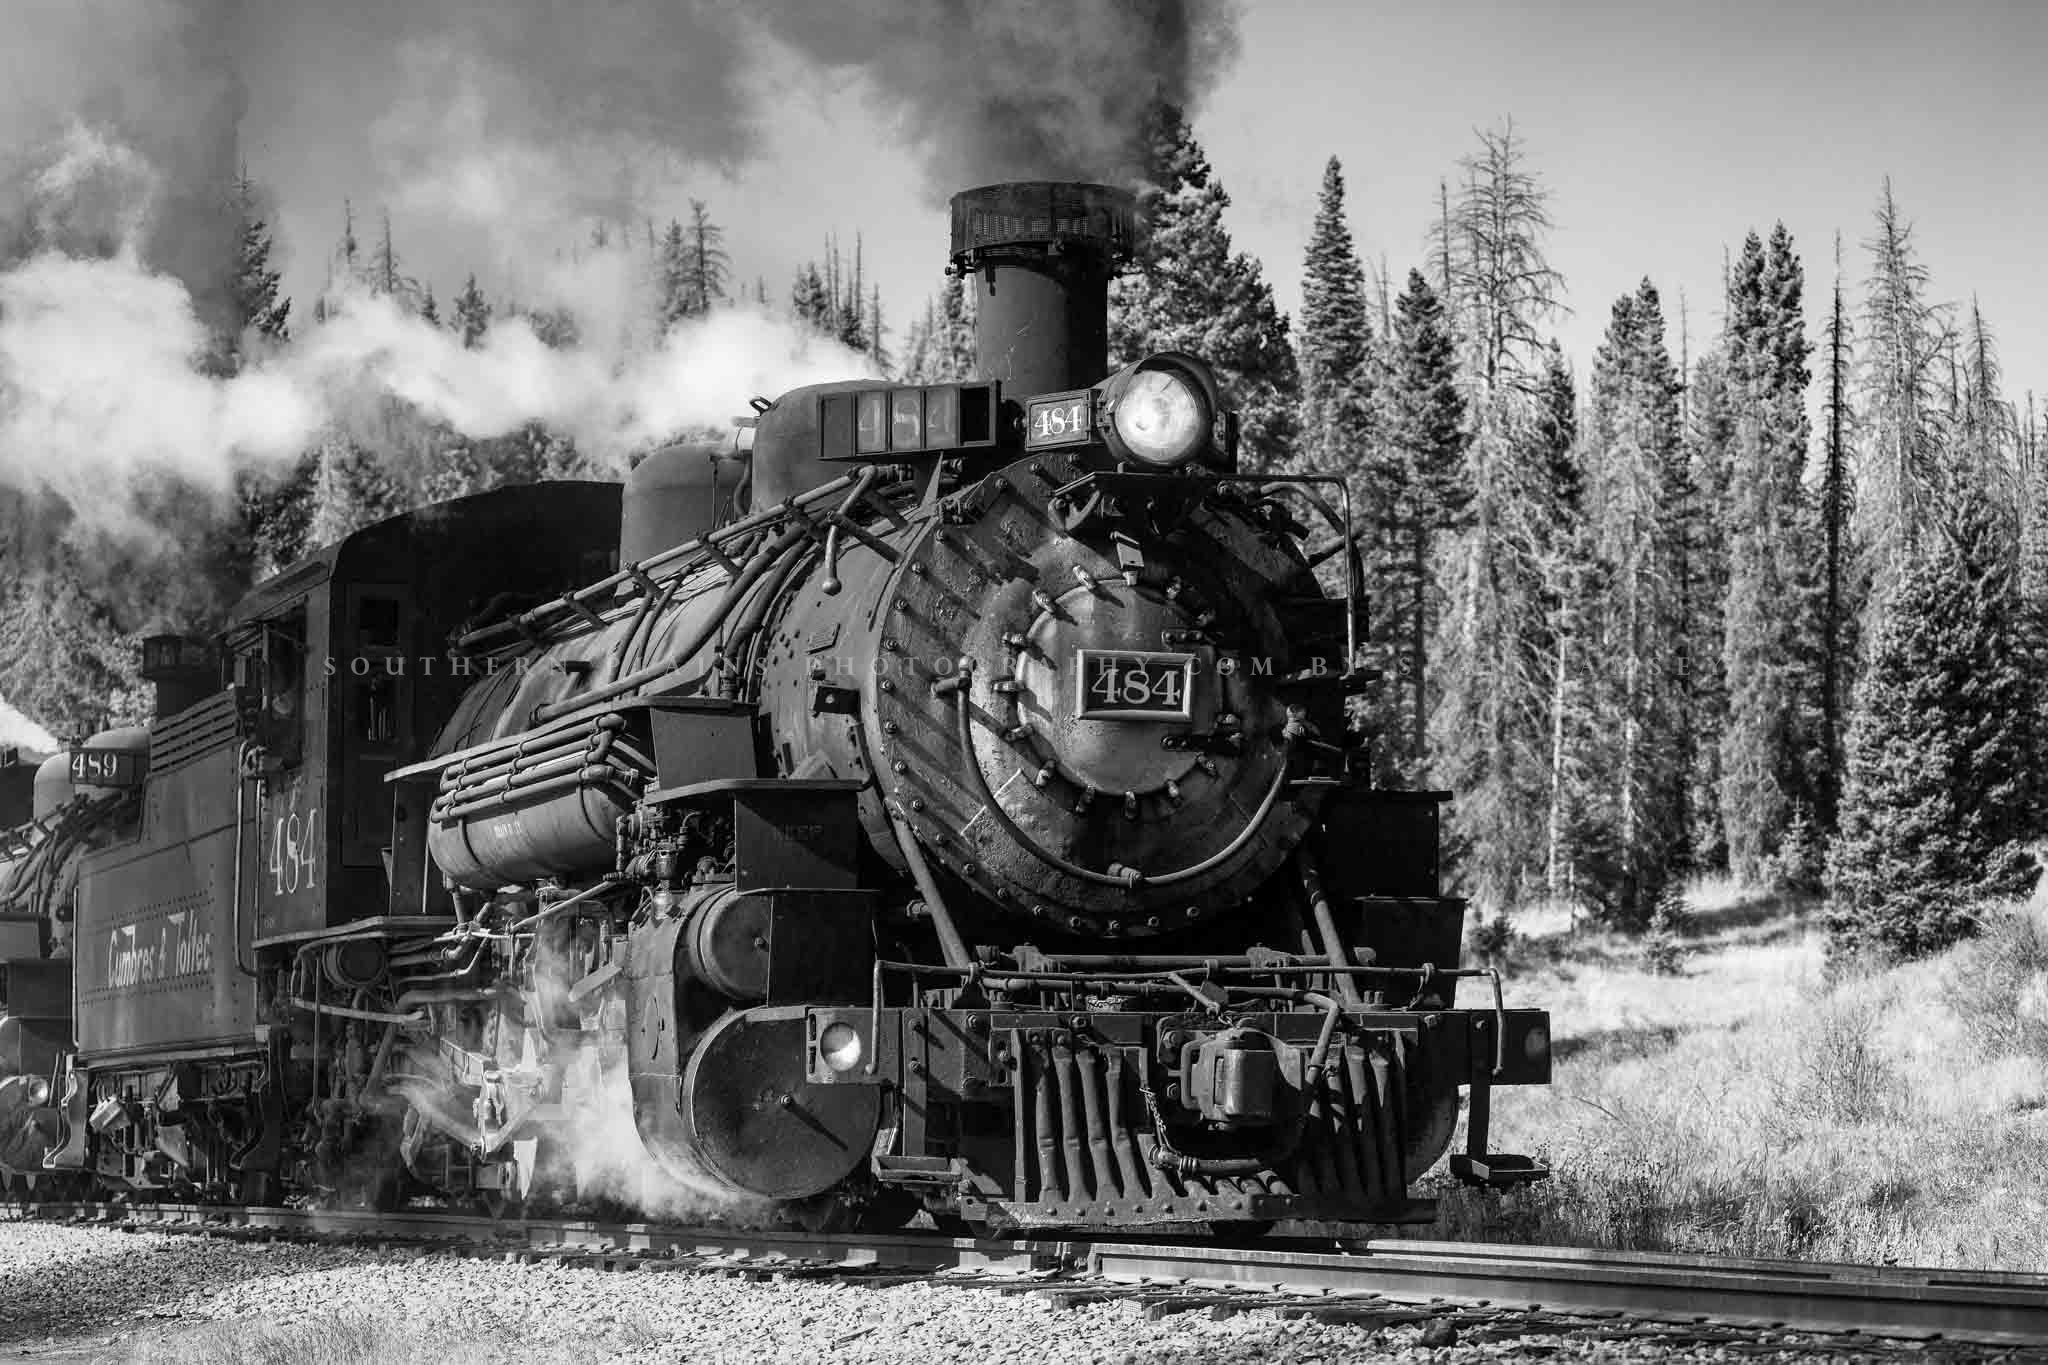 Black and white train photography print of a steam engine locomotive on an autumn day in the Colorado Rocky Mountains by Sean Ramsey of Southern Plains Photography.